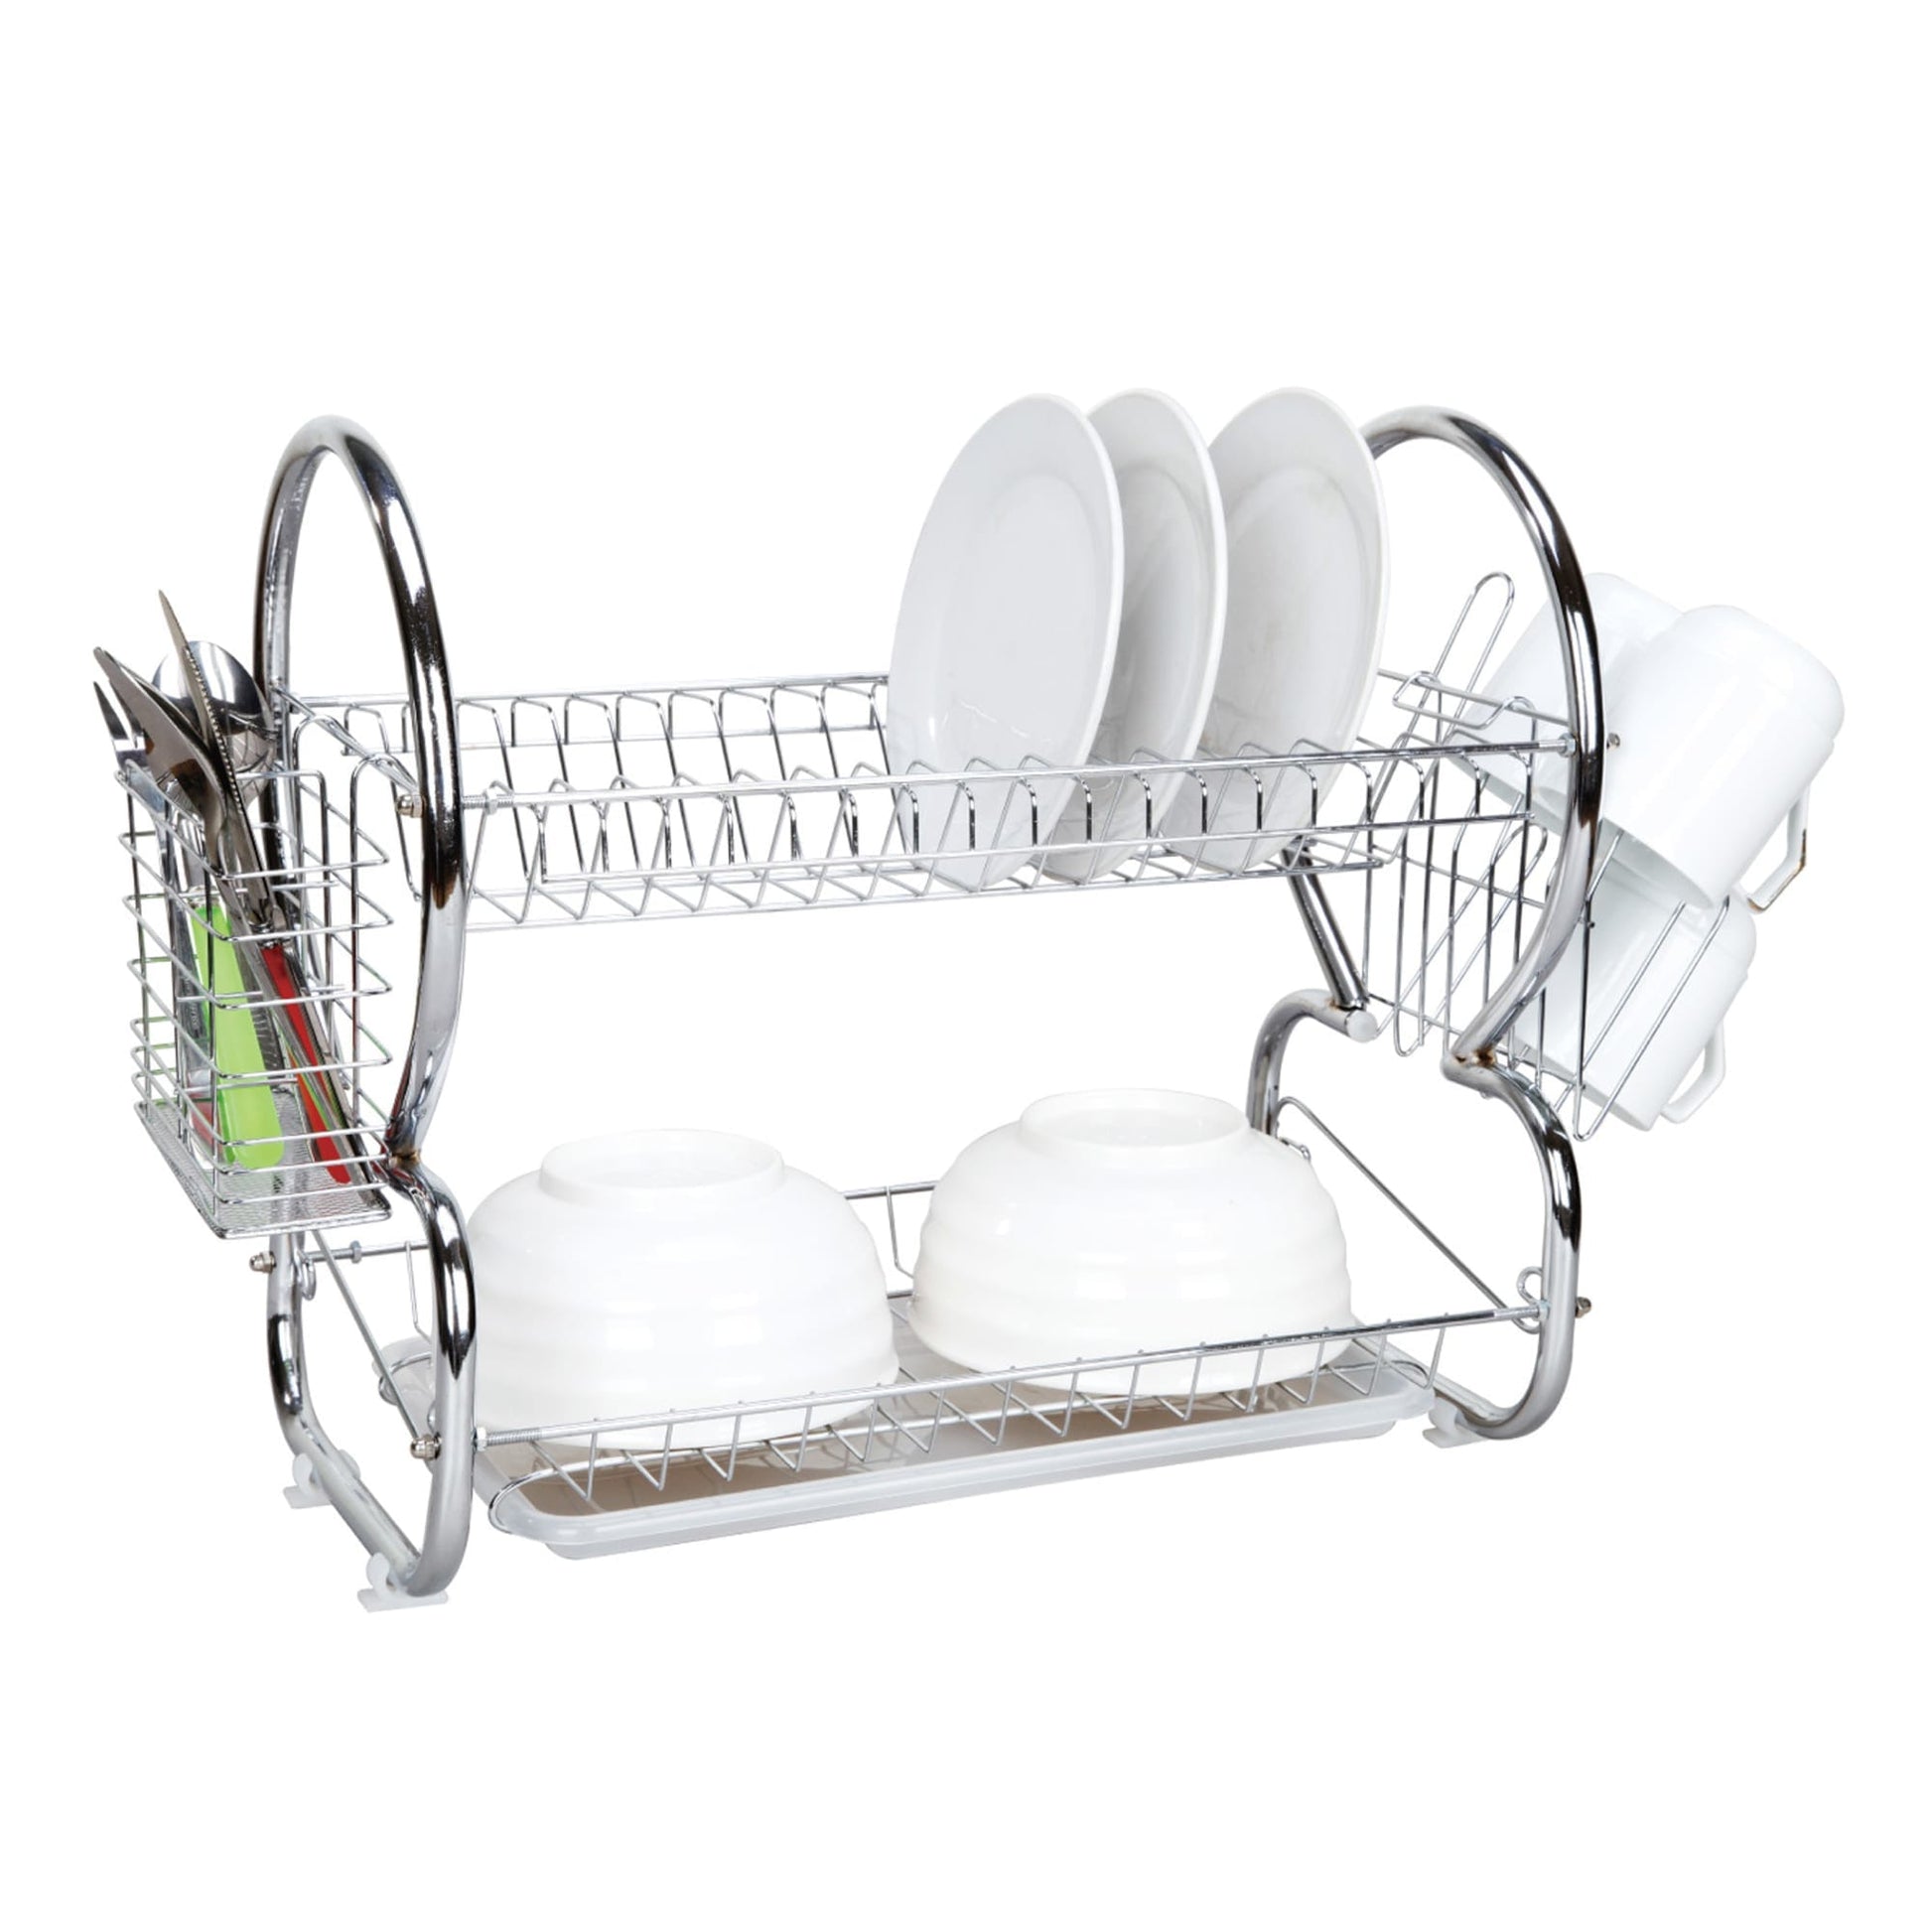 3 Piece Chrome Plated Steel and Plastic Dish Rack, Red